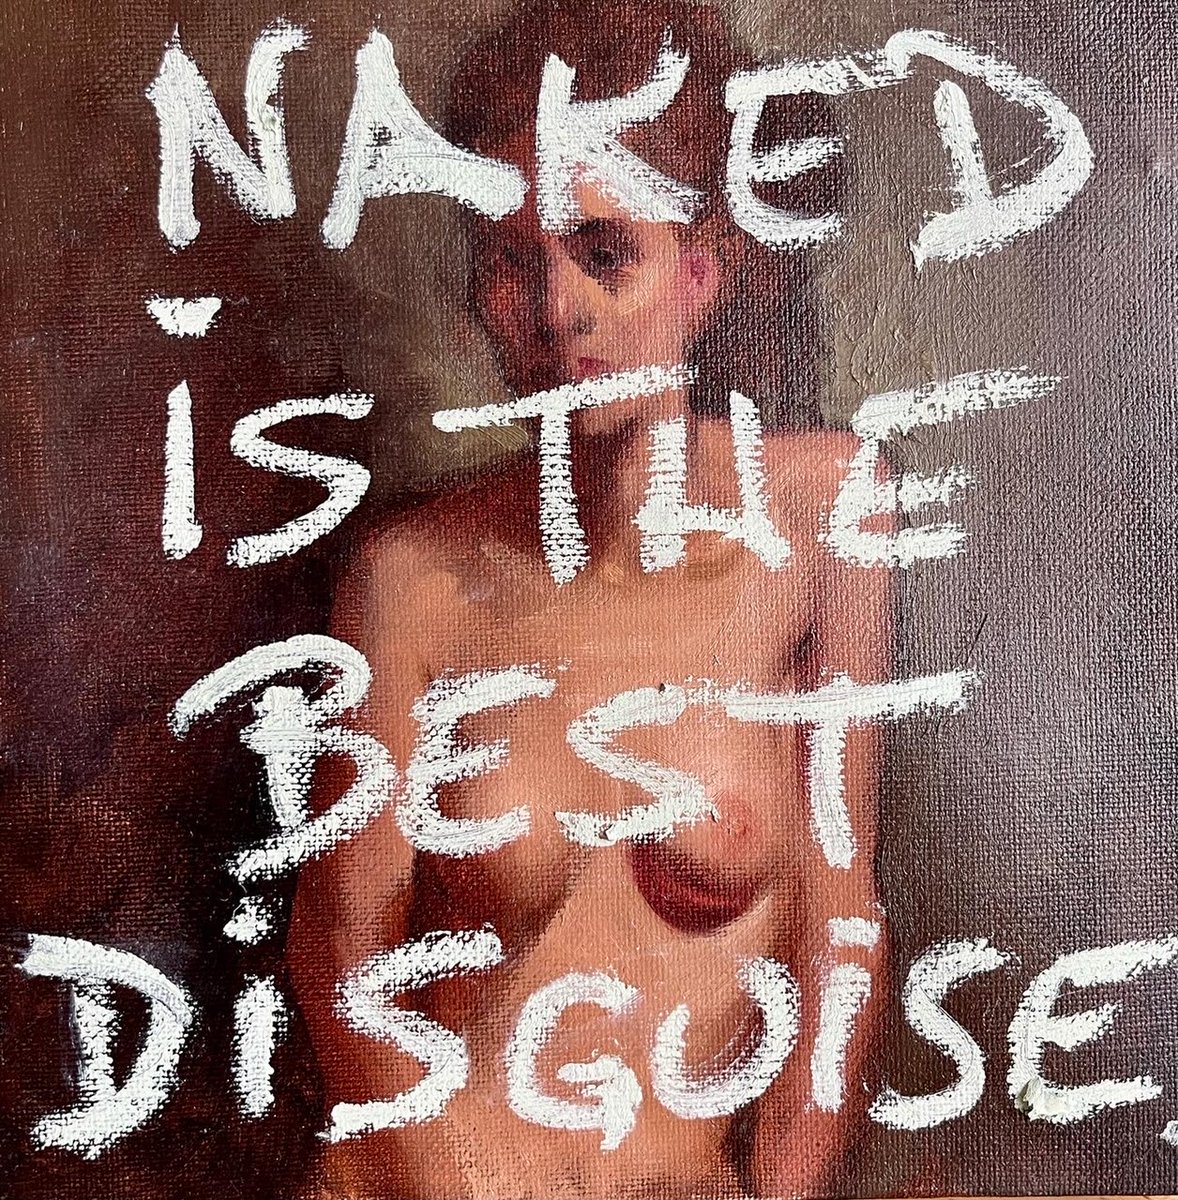 'Naked is the Best Disguise' by #DarvishFakhr. 1/100 #NFT. Buy it here:

opensea.io/assets/0x495f9…

#NFTs #NFTart #NFTCommunity #NFTdrops #NFTartist #Art #Artist #Artists #Iran #Iranian #Naked #Painting #Surreal #Rumi #Disguise #Paintings